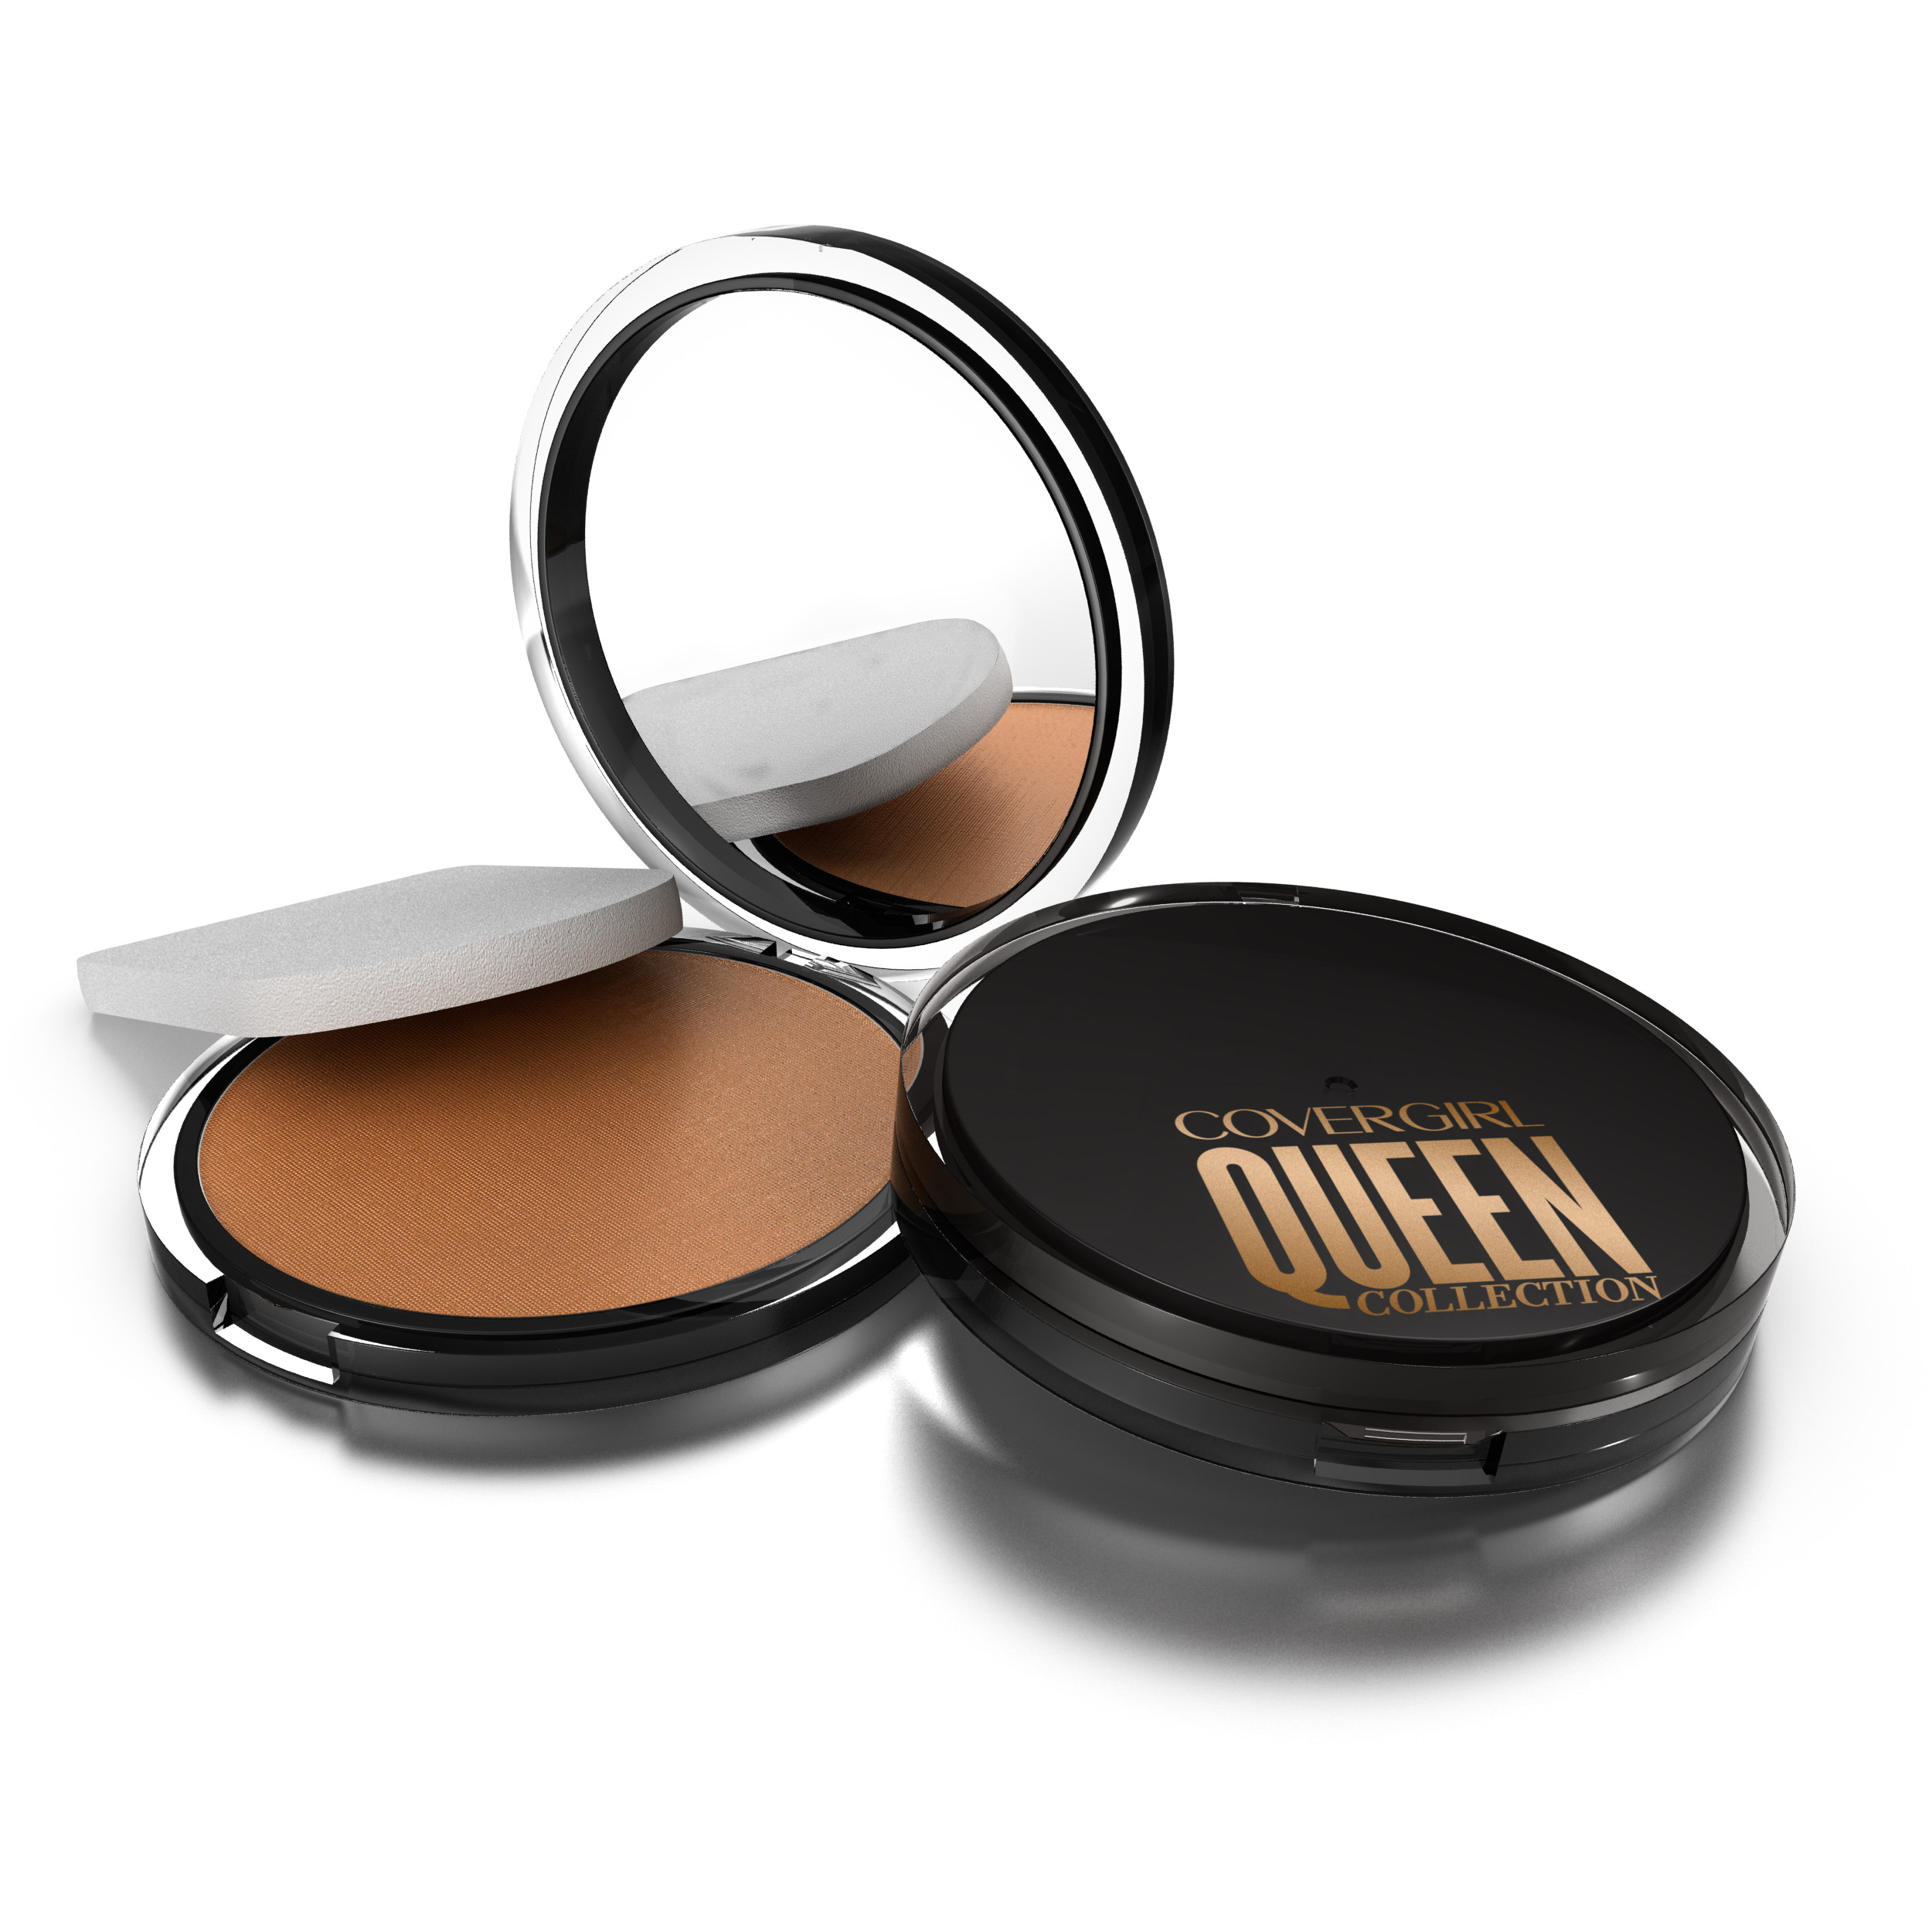 COVERGIRL Queen Lasting Matte Pressed Powder Foundation, Golden - image 1 of 8